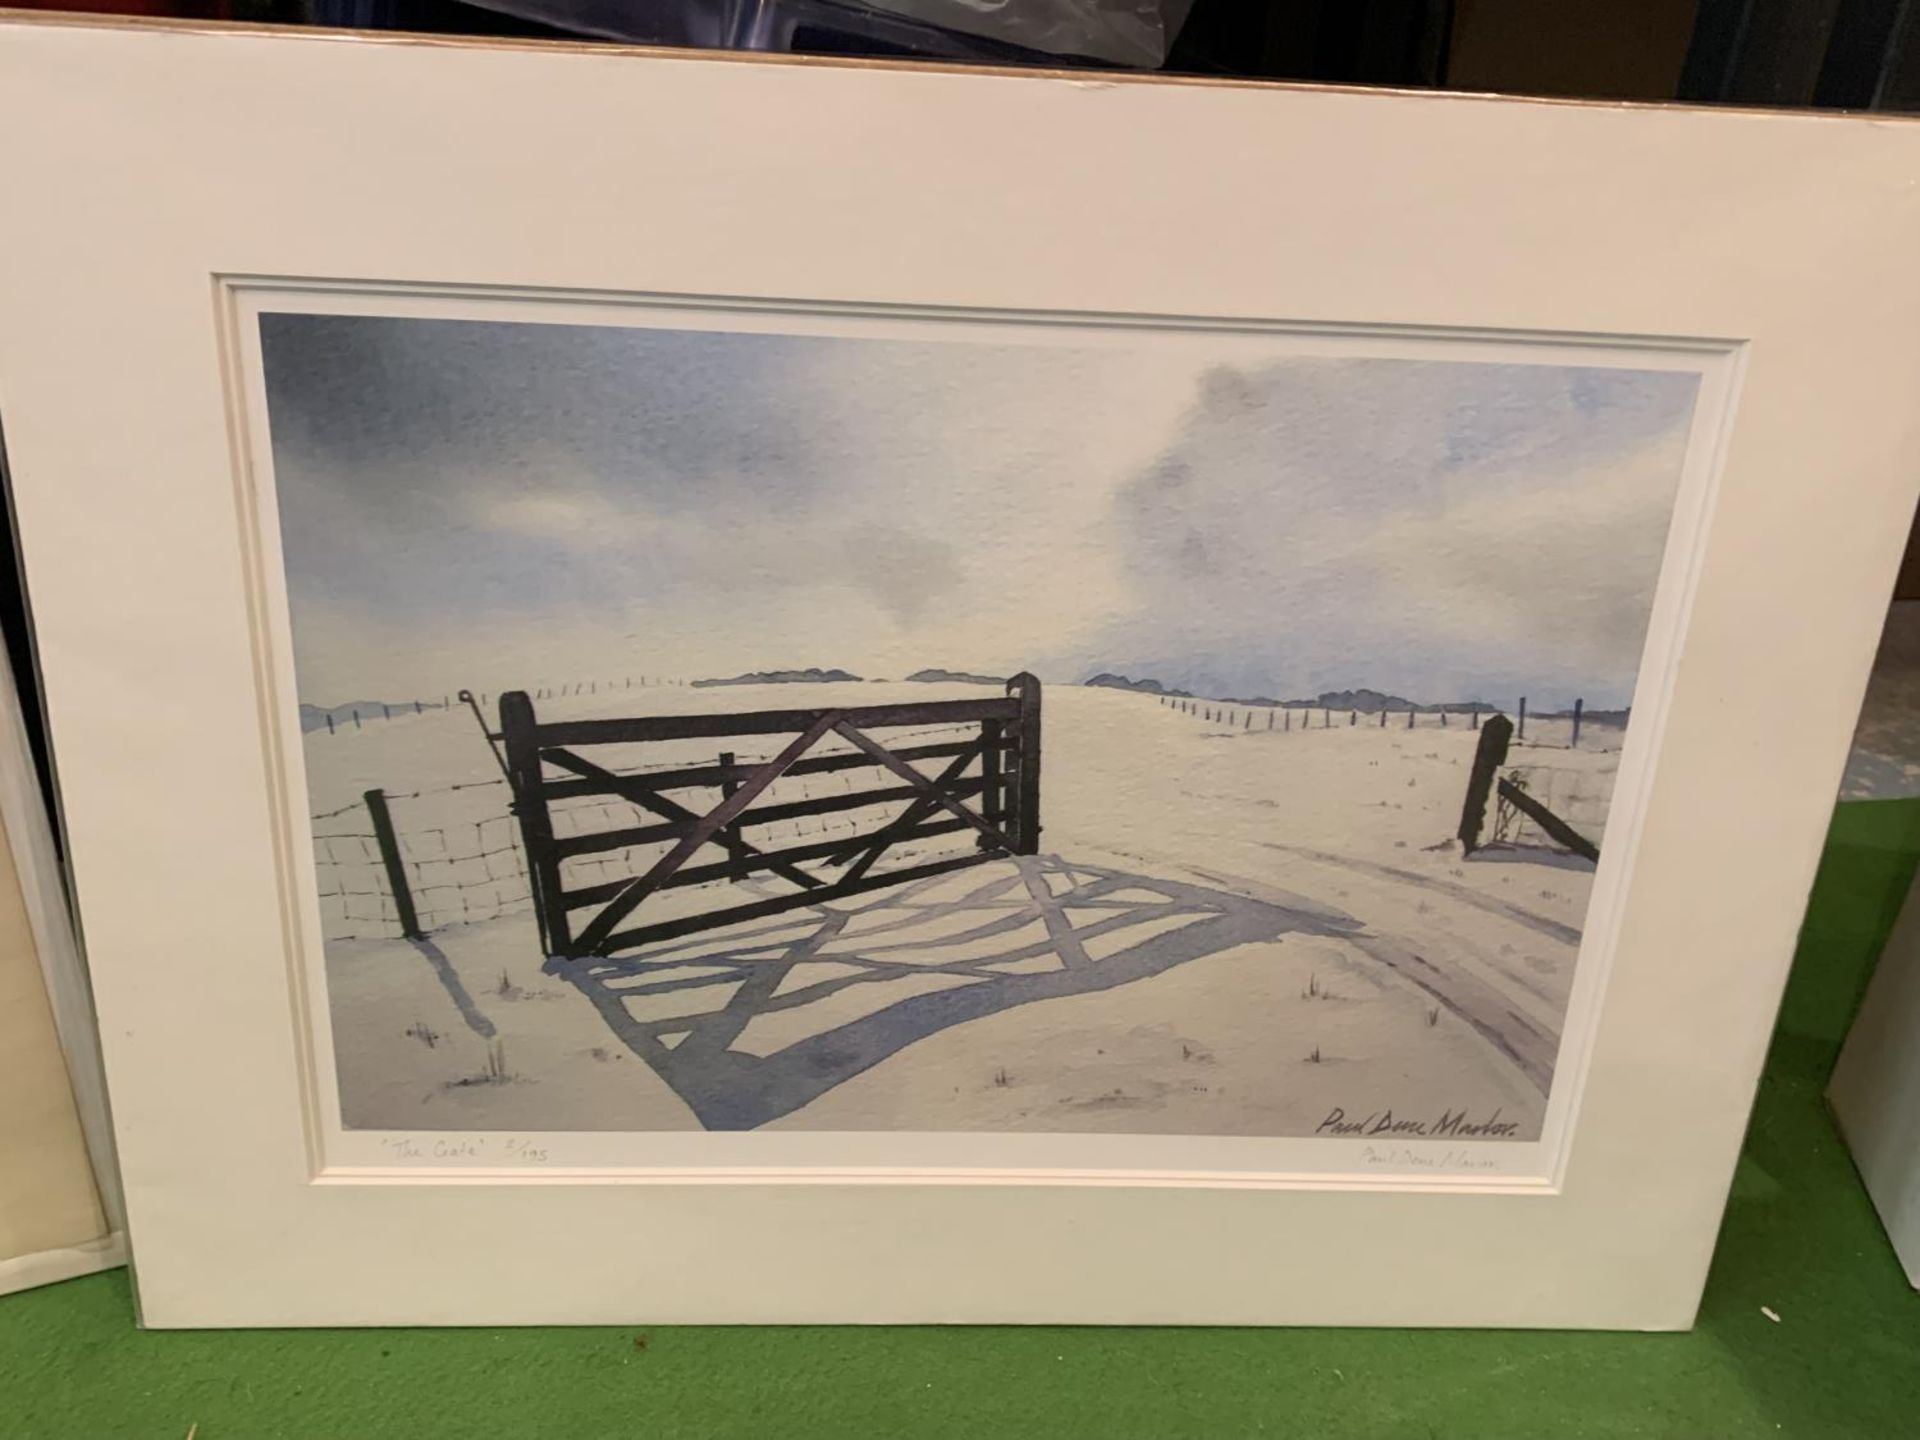 A MOUNTED LIMITED EDITION PICTURE - 2/195 - ENTITLED THE GATE SIGNED BY PAUL DENE MARLOR